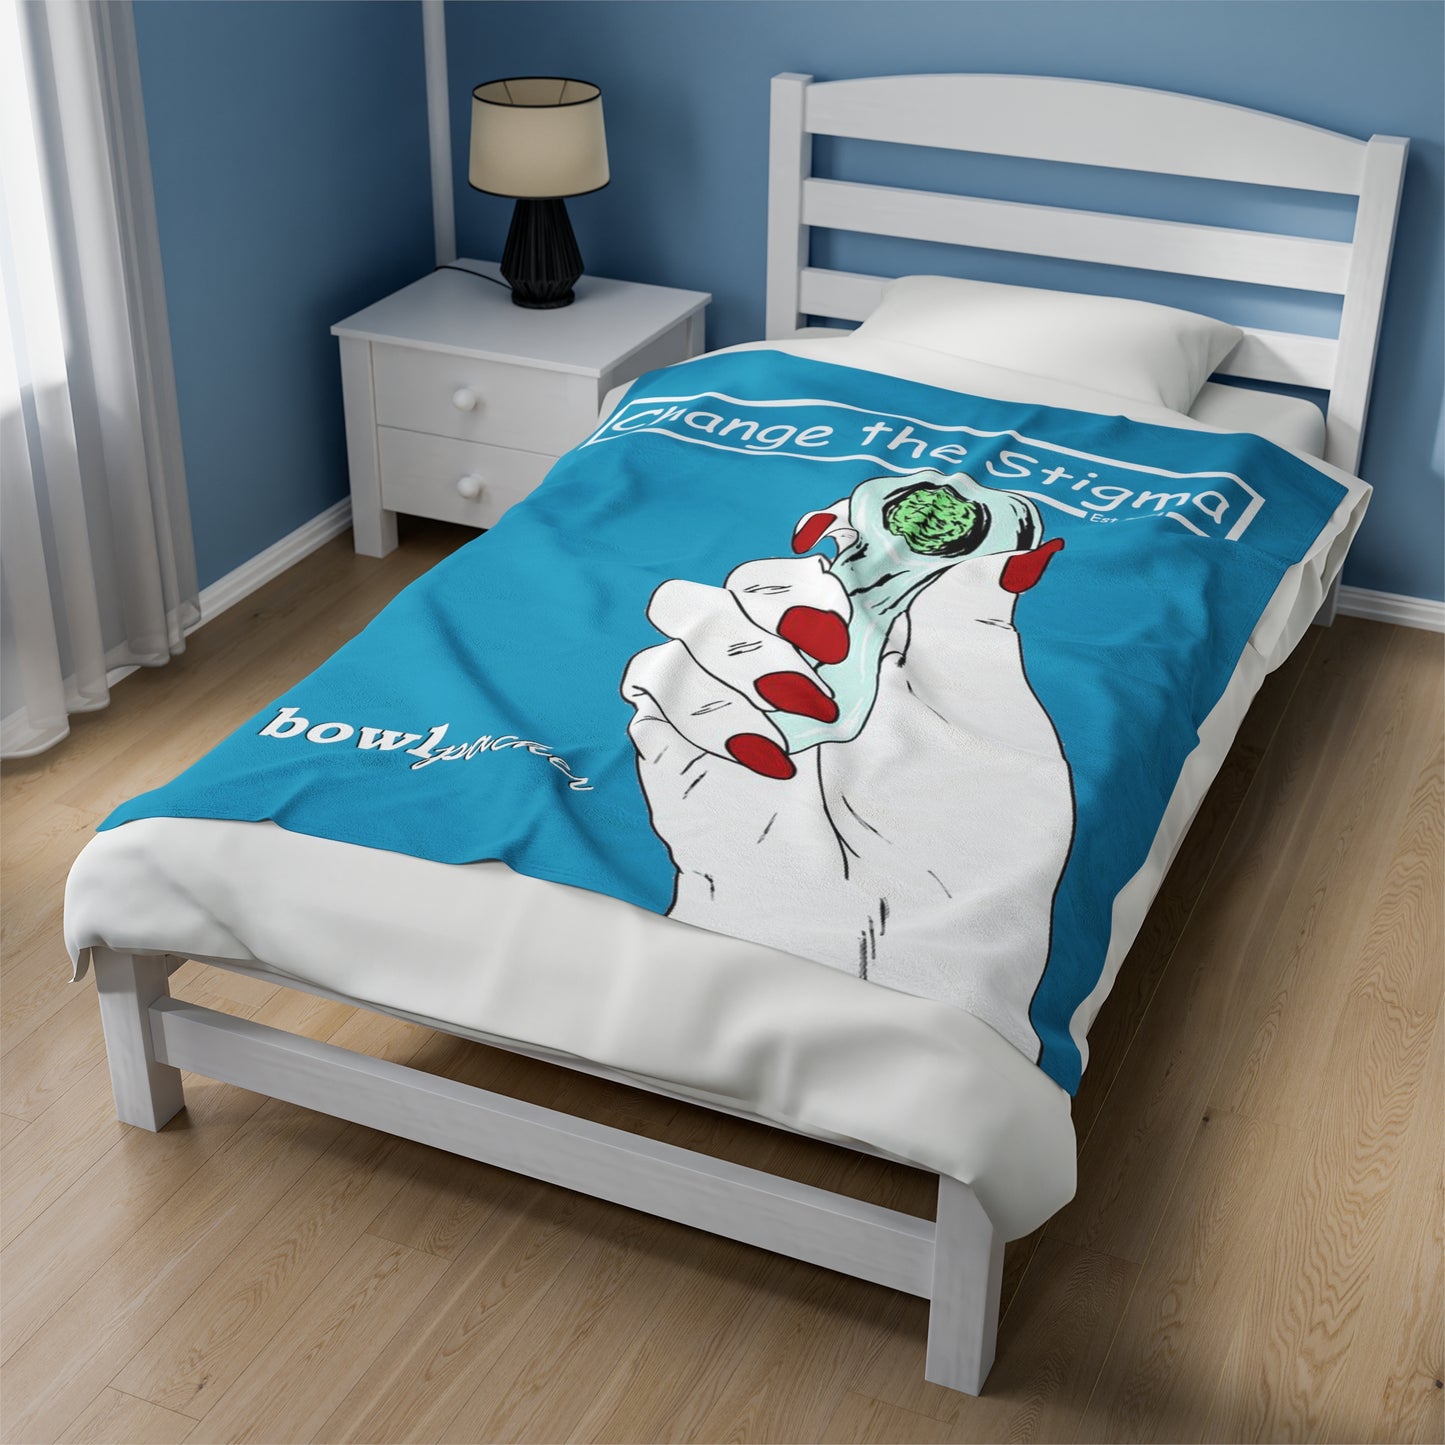 Change the Stigma, Turquoise background, a woman with red nails holding a packed cannabis pipe with fresh cannabis present. It also says "Bowl packer". It shows the blanket in a bedroom on a white bed. Blue walls are present on a hardwood floor. 50"x60" size